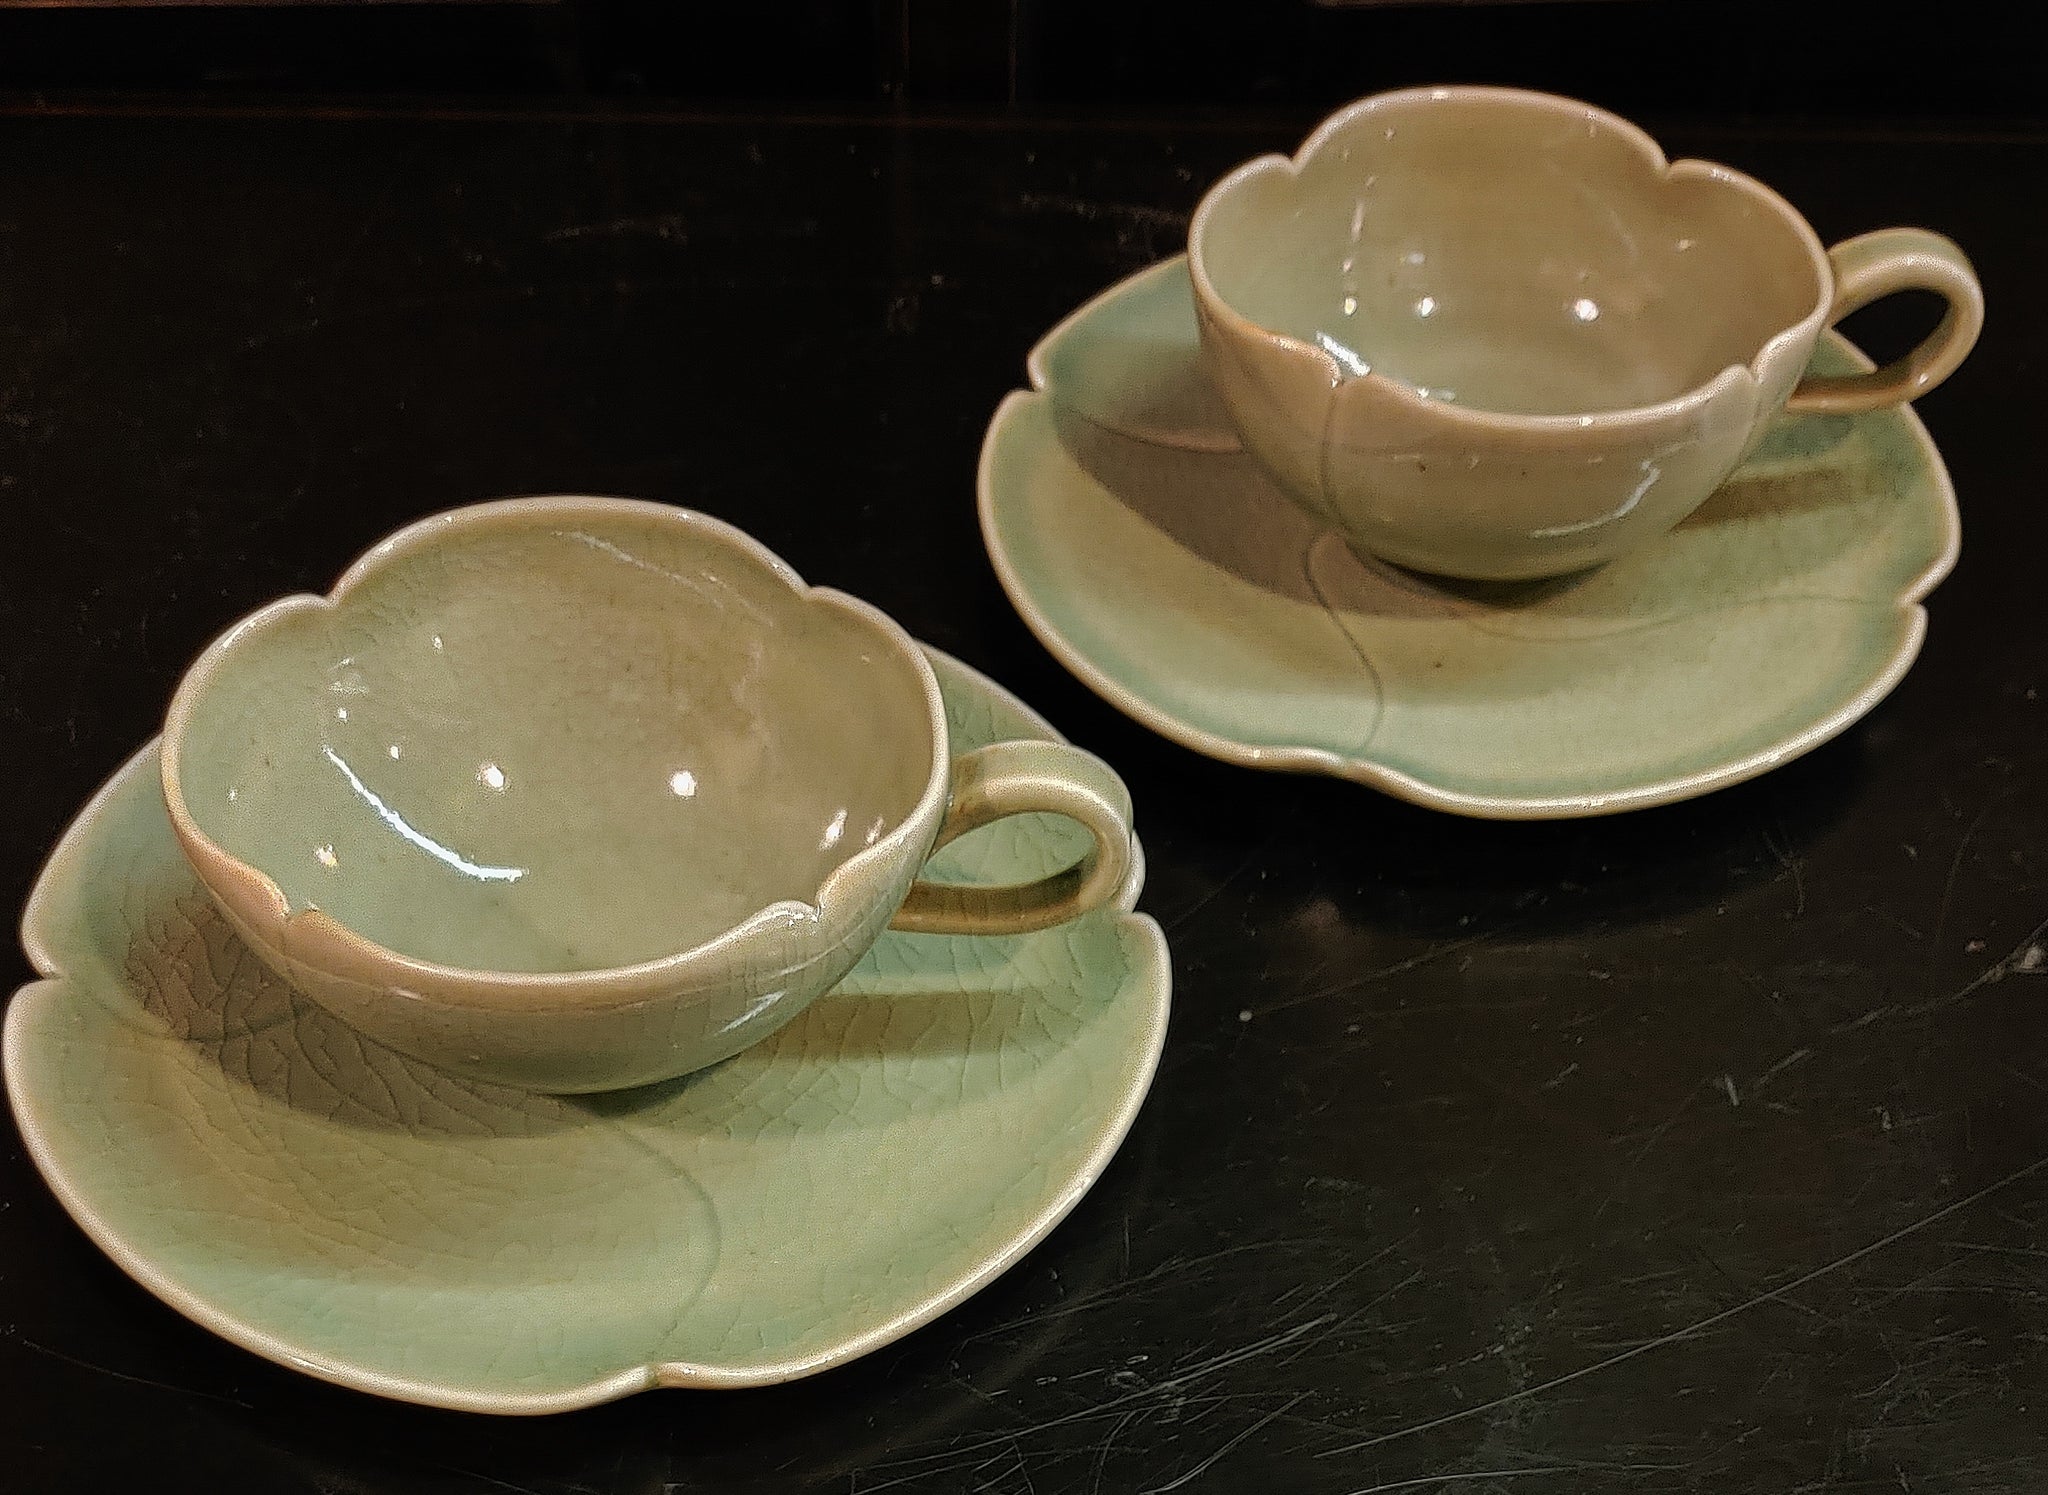 Vintage Handmade Signed Glazed Pottery Scalloped Flat Cups and Saucers by Elsa Rady